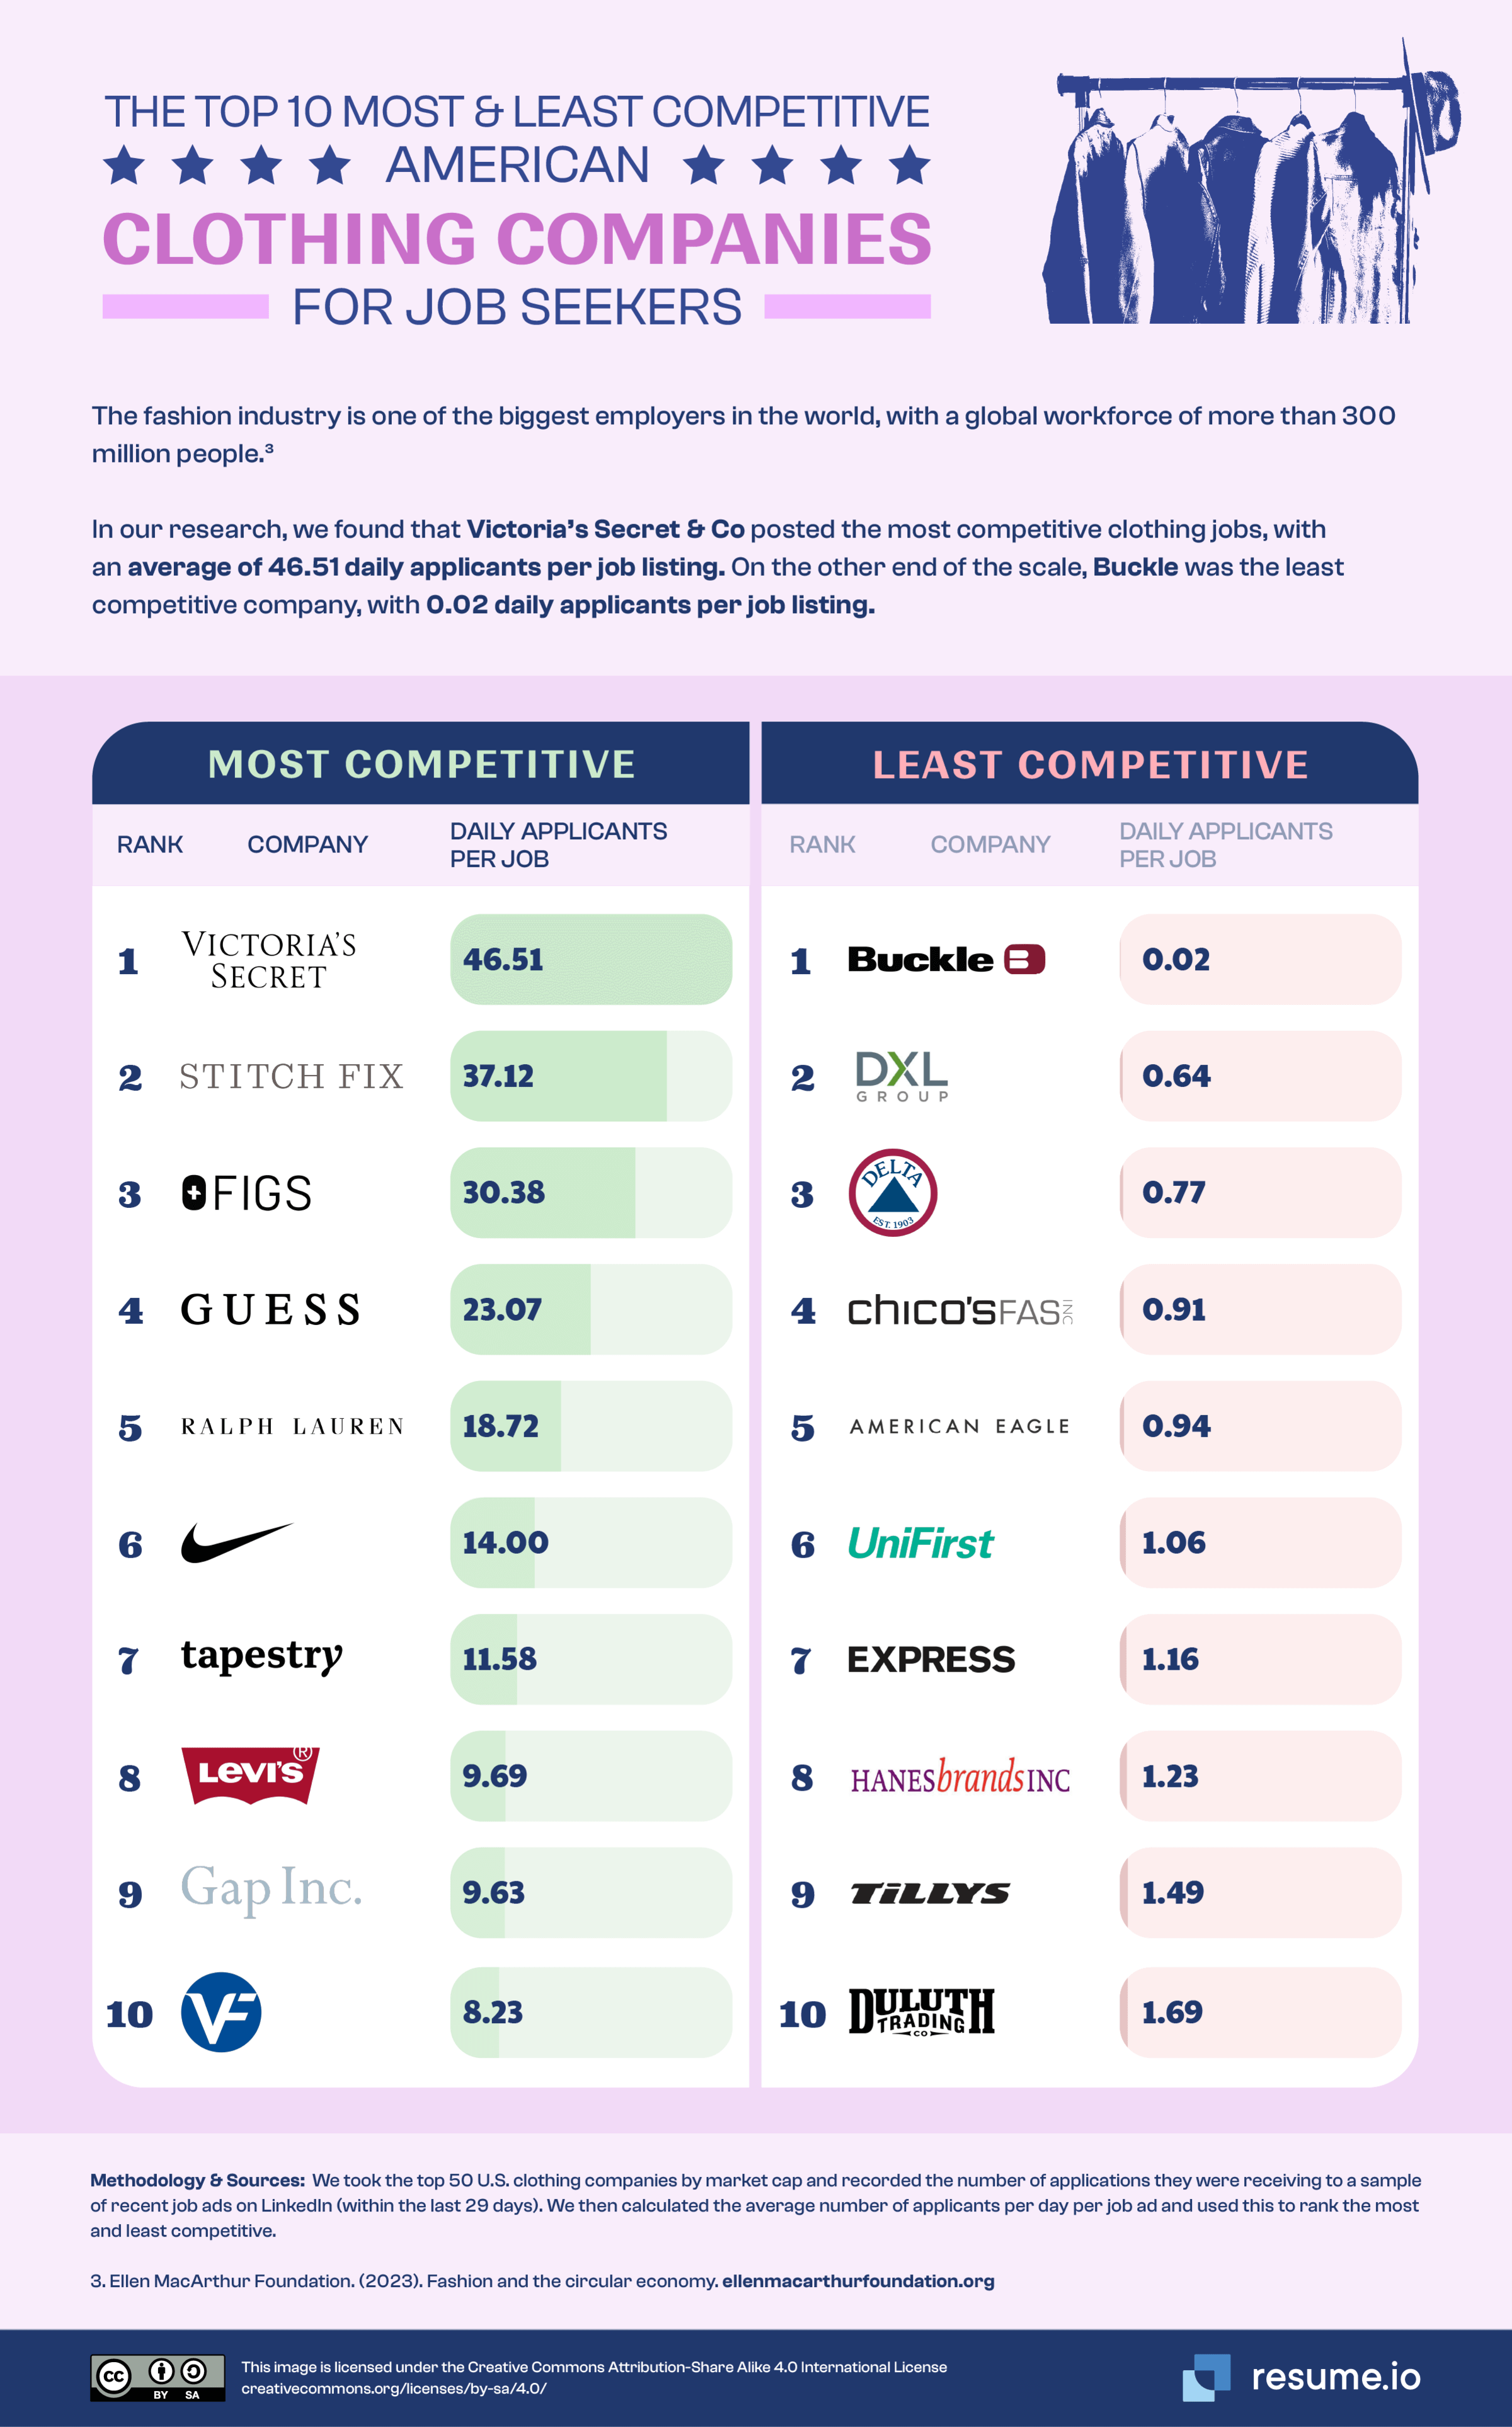 The top 10 most and least competitive clothing companies